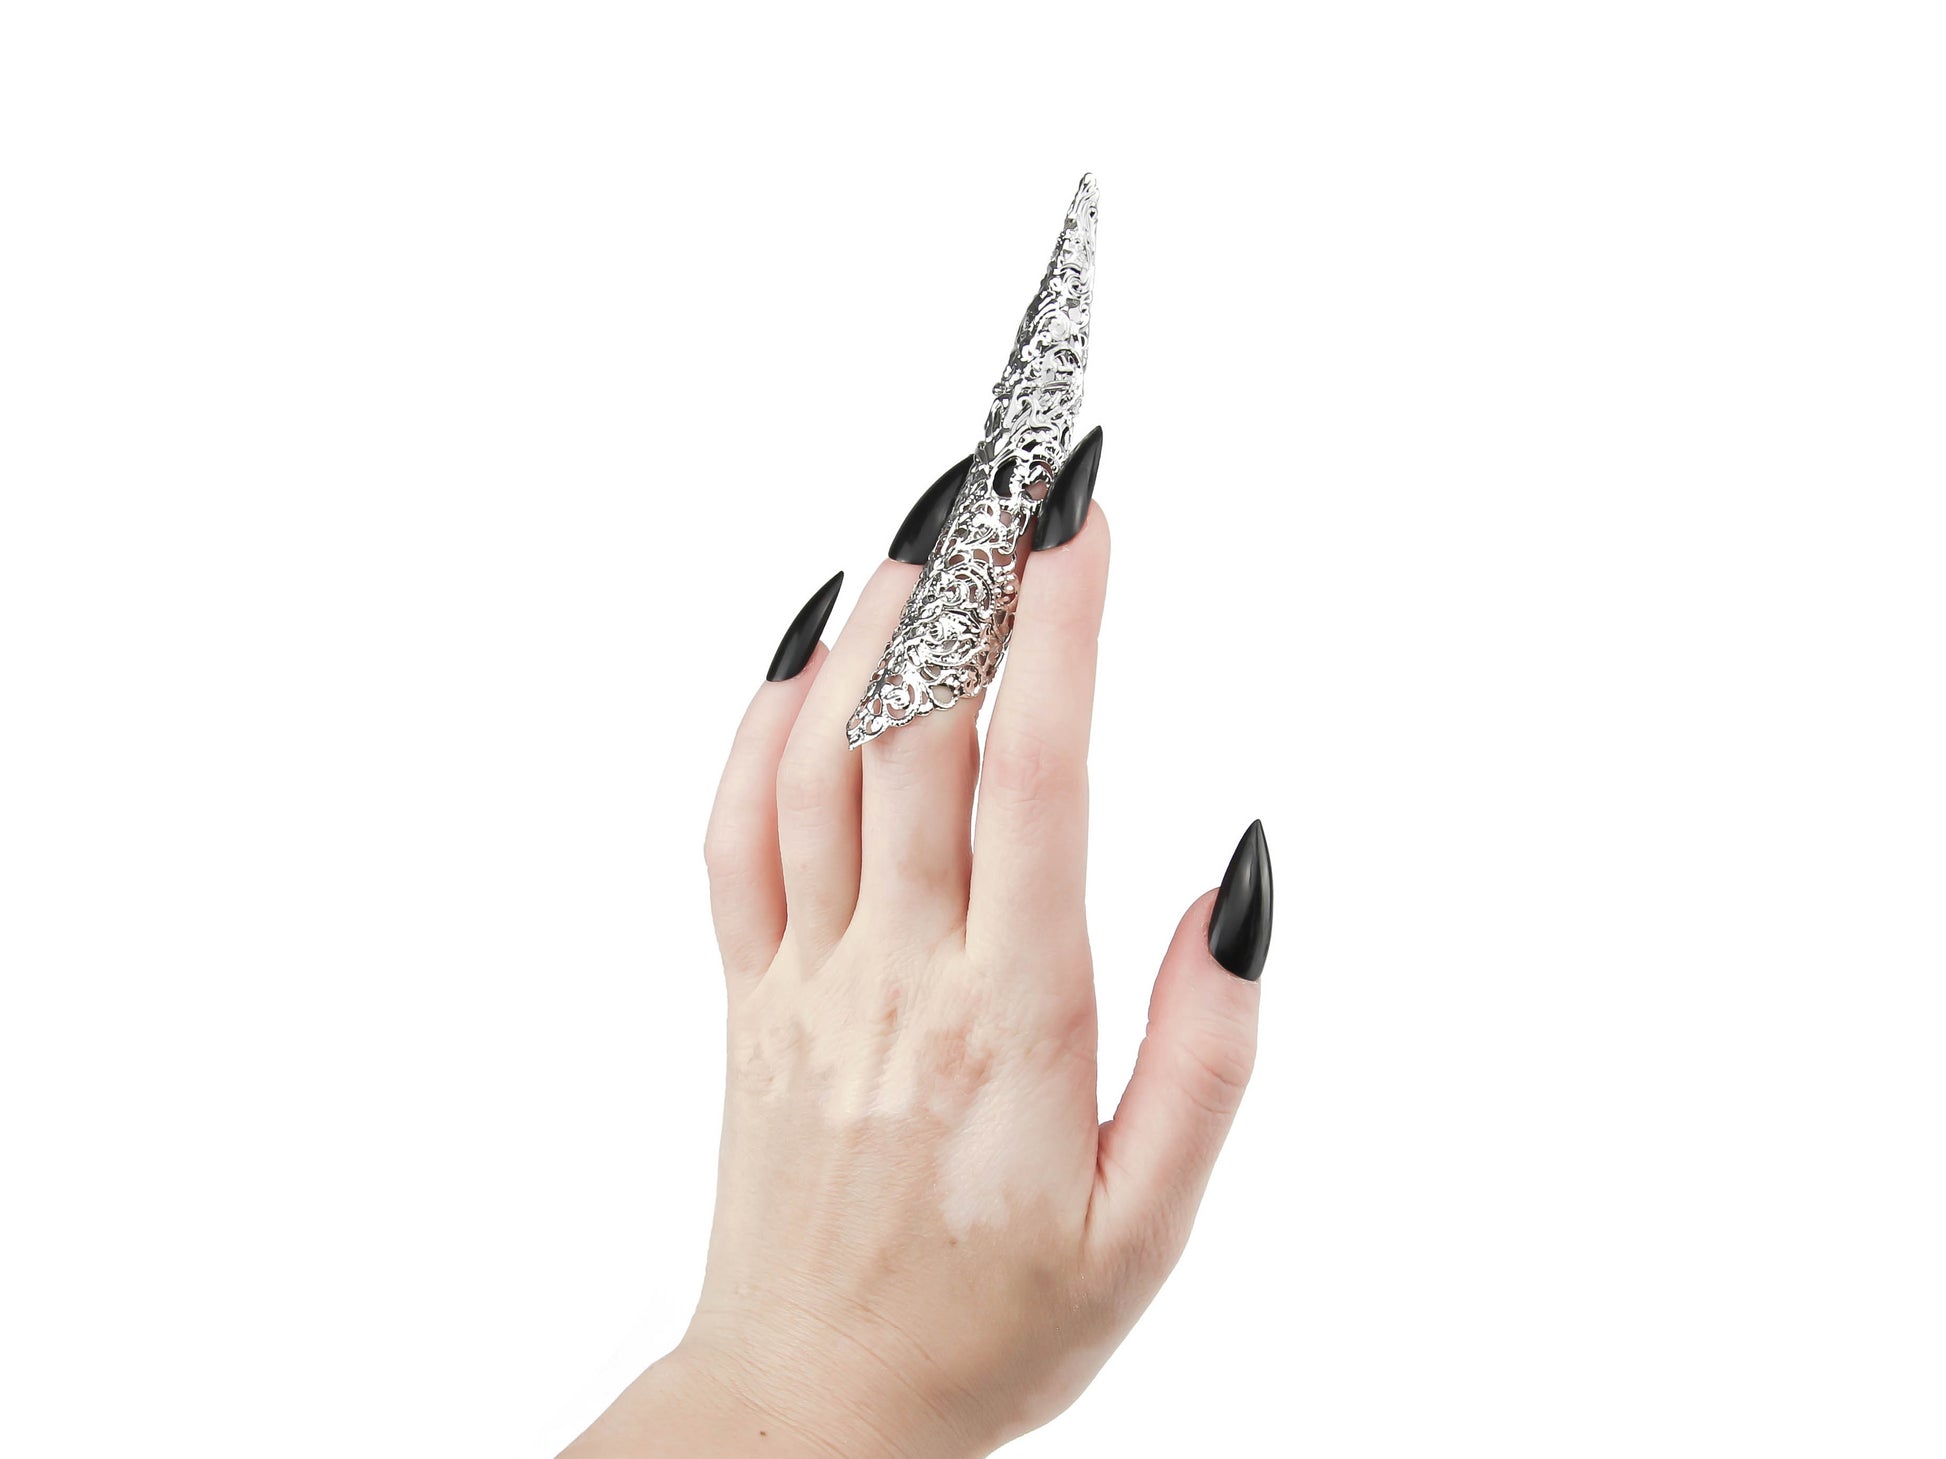 A delicate hand is accentuated by a single Myril Jewels midi ring with a dramatic long claw, embodying neo-goth elegance. This finely crafted piece is a quintessential accessory for gothic and alternative style lovers, perfect as a bold statement for everyday wear or as a unique goth girlfriend gift.